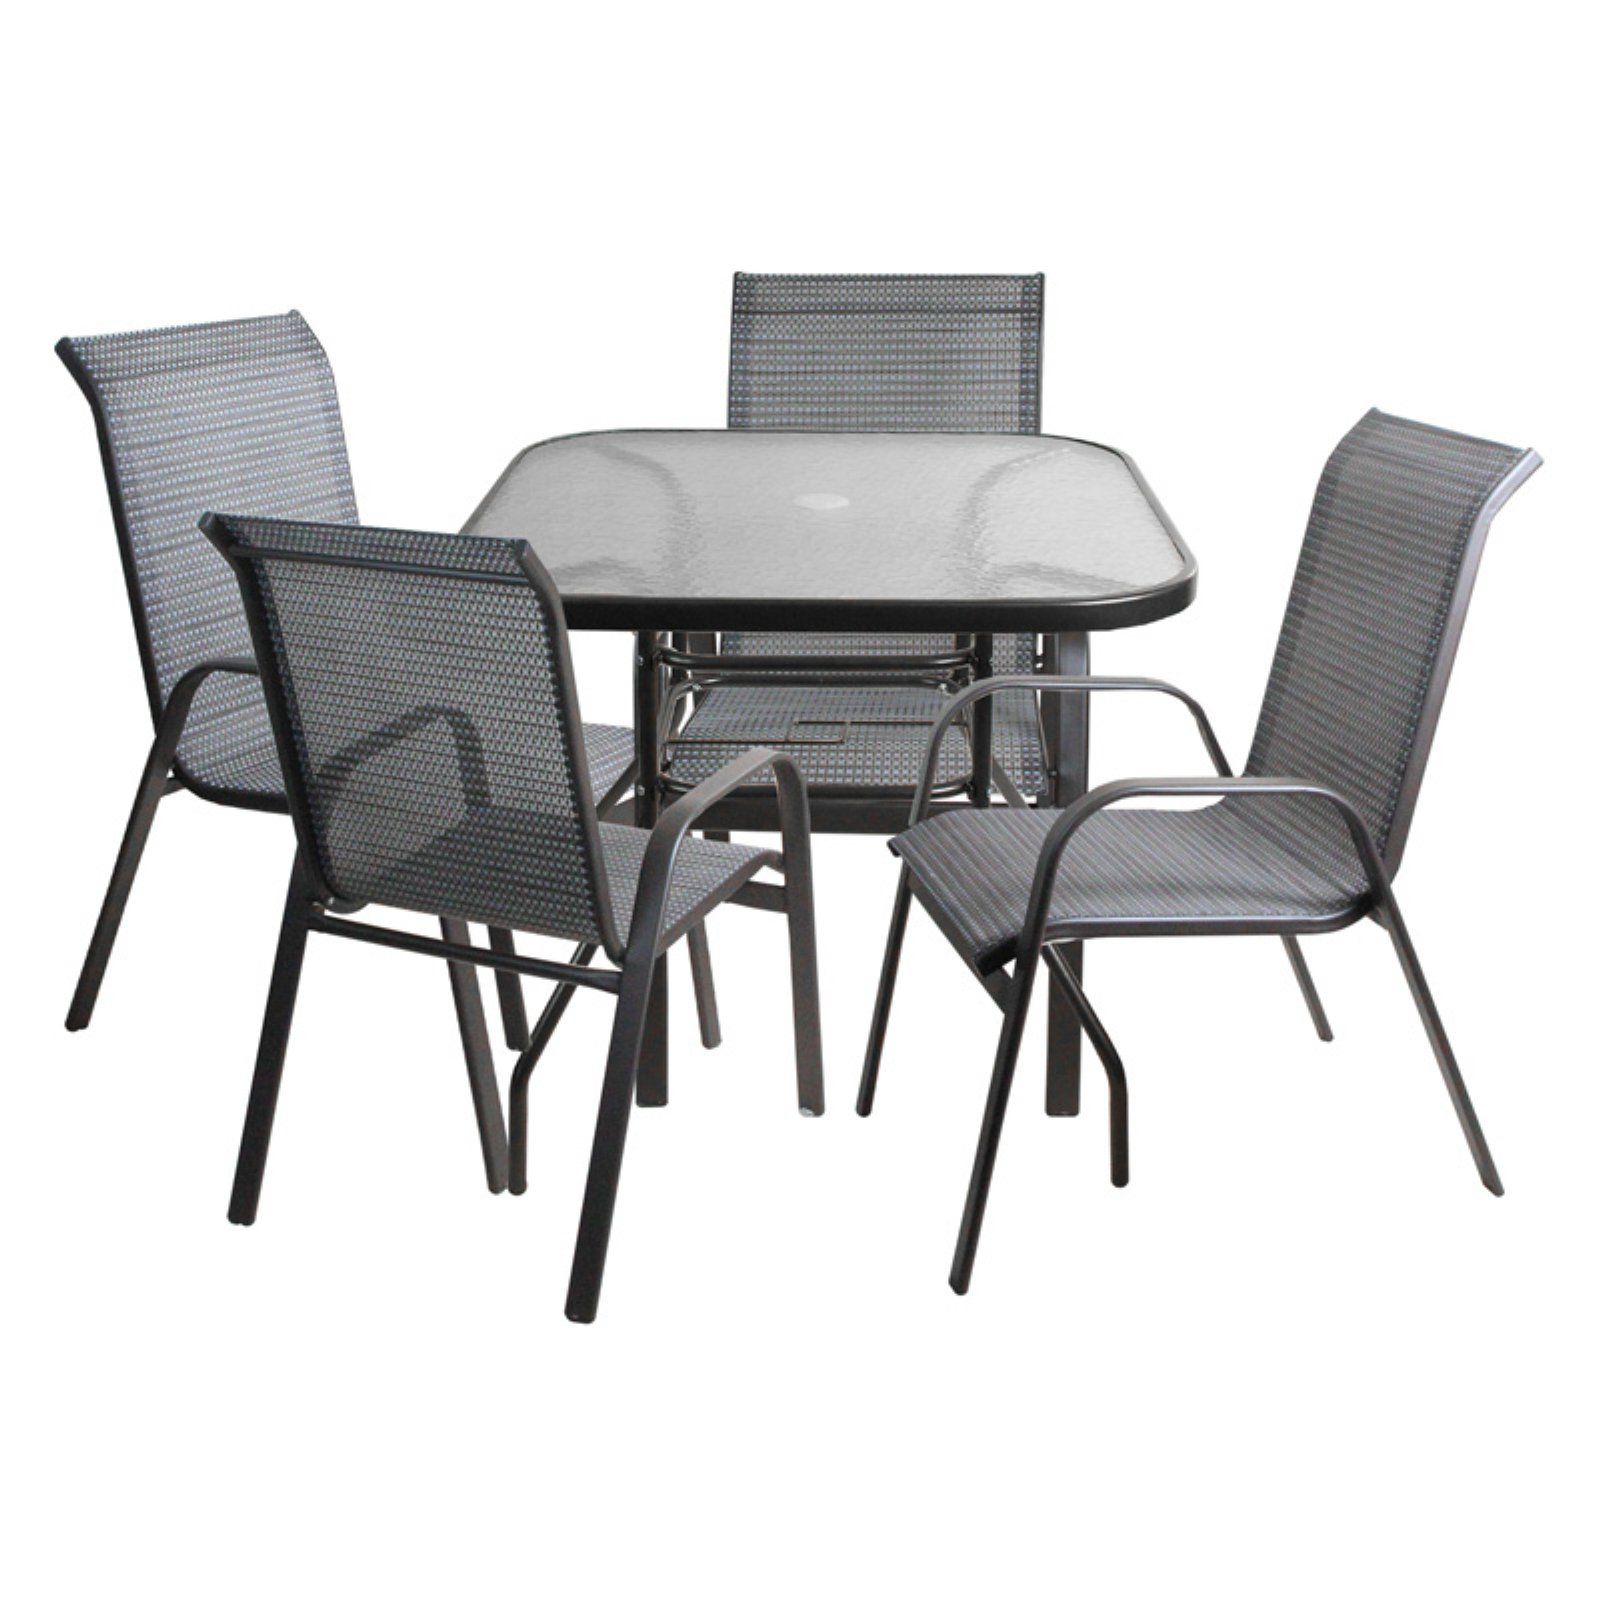 5 Piece Outdoor Seating Patio Sets Pertaining To Well Known Cc Outdoor Living 5 Piece Outdoor Mesh Textilene And Steel Rectangle (View 14 of 15)